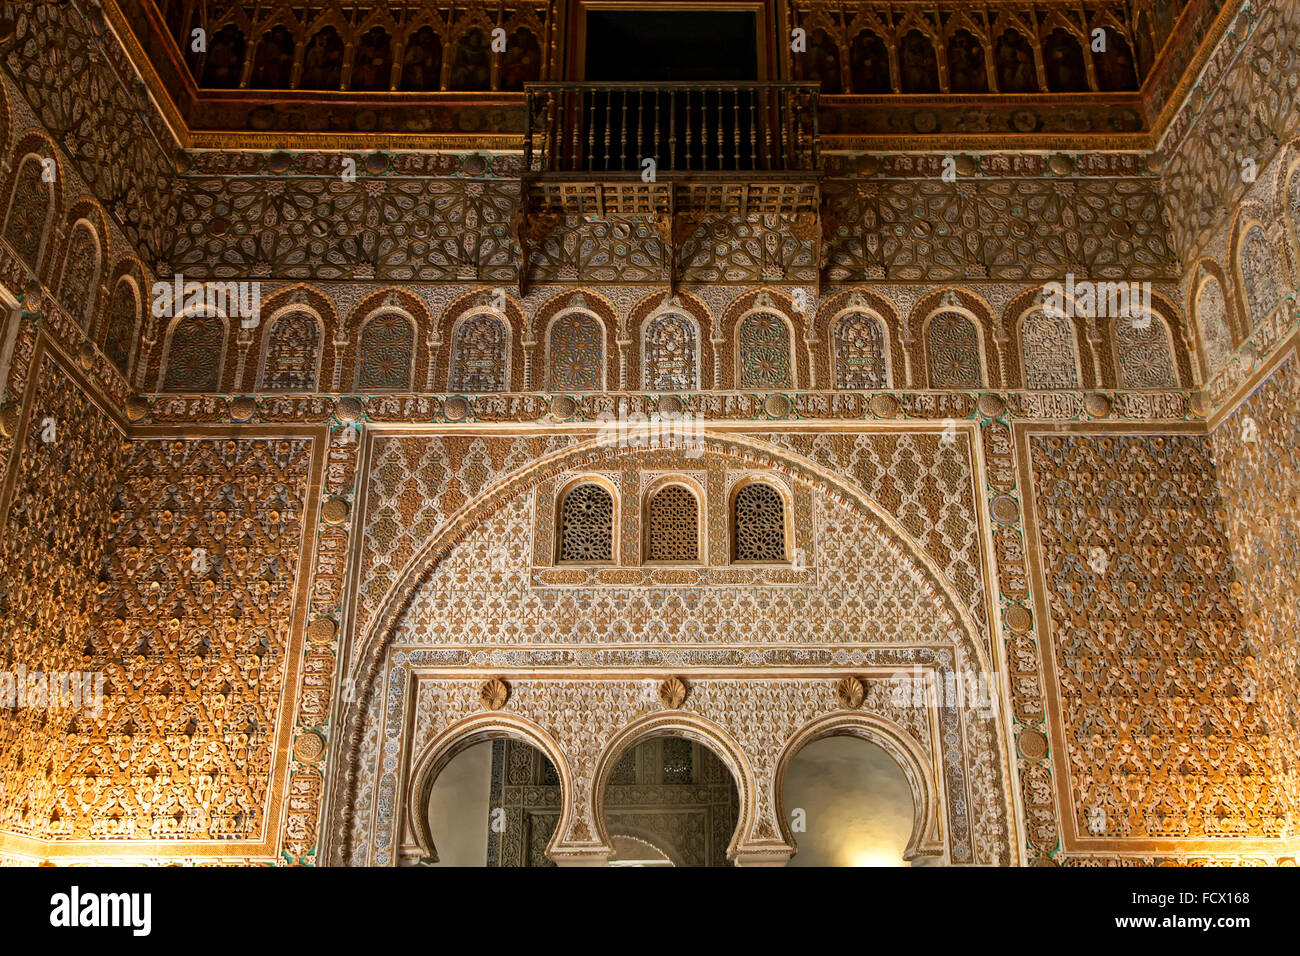 Intricately carved wall, Salon de Embajadores (Hall of the Ambassadors), Reales Alcazares, Seville, Spain Stock Photo